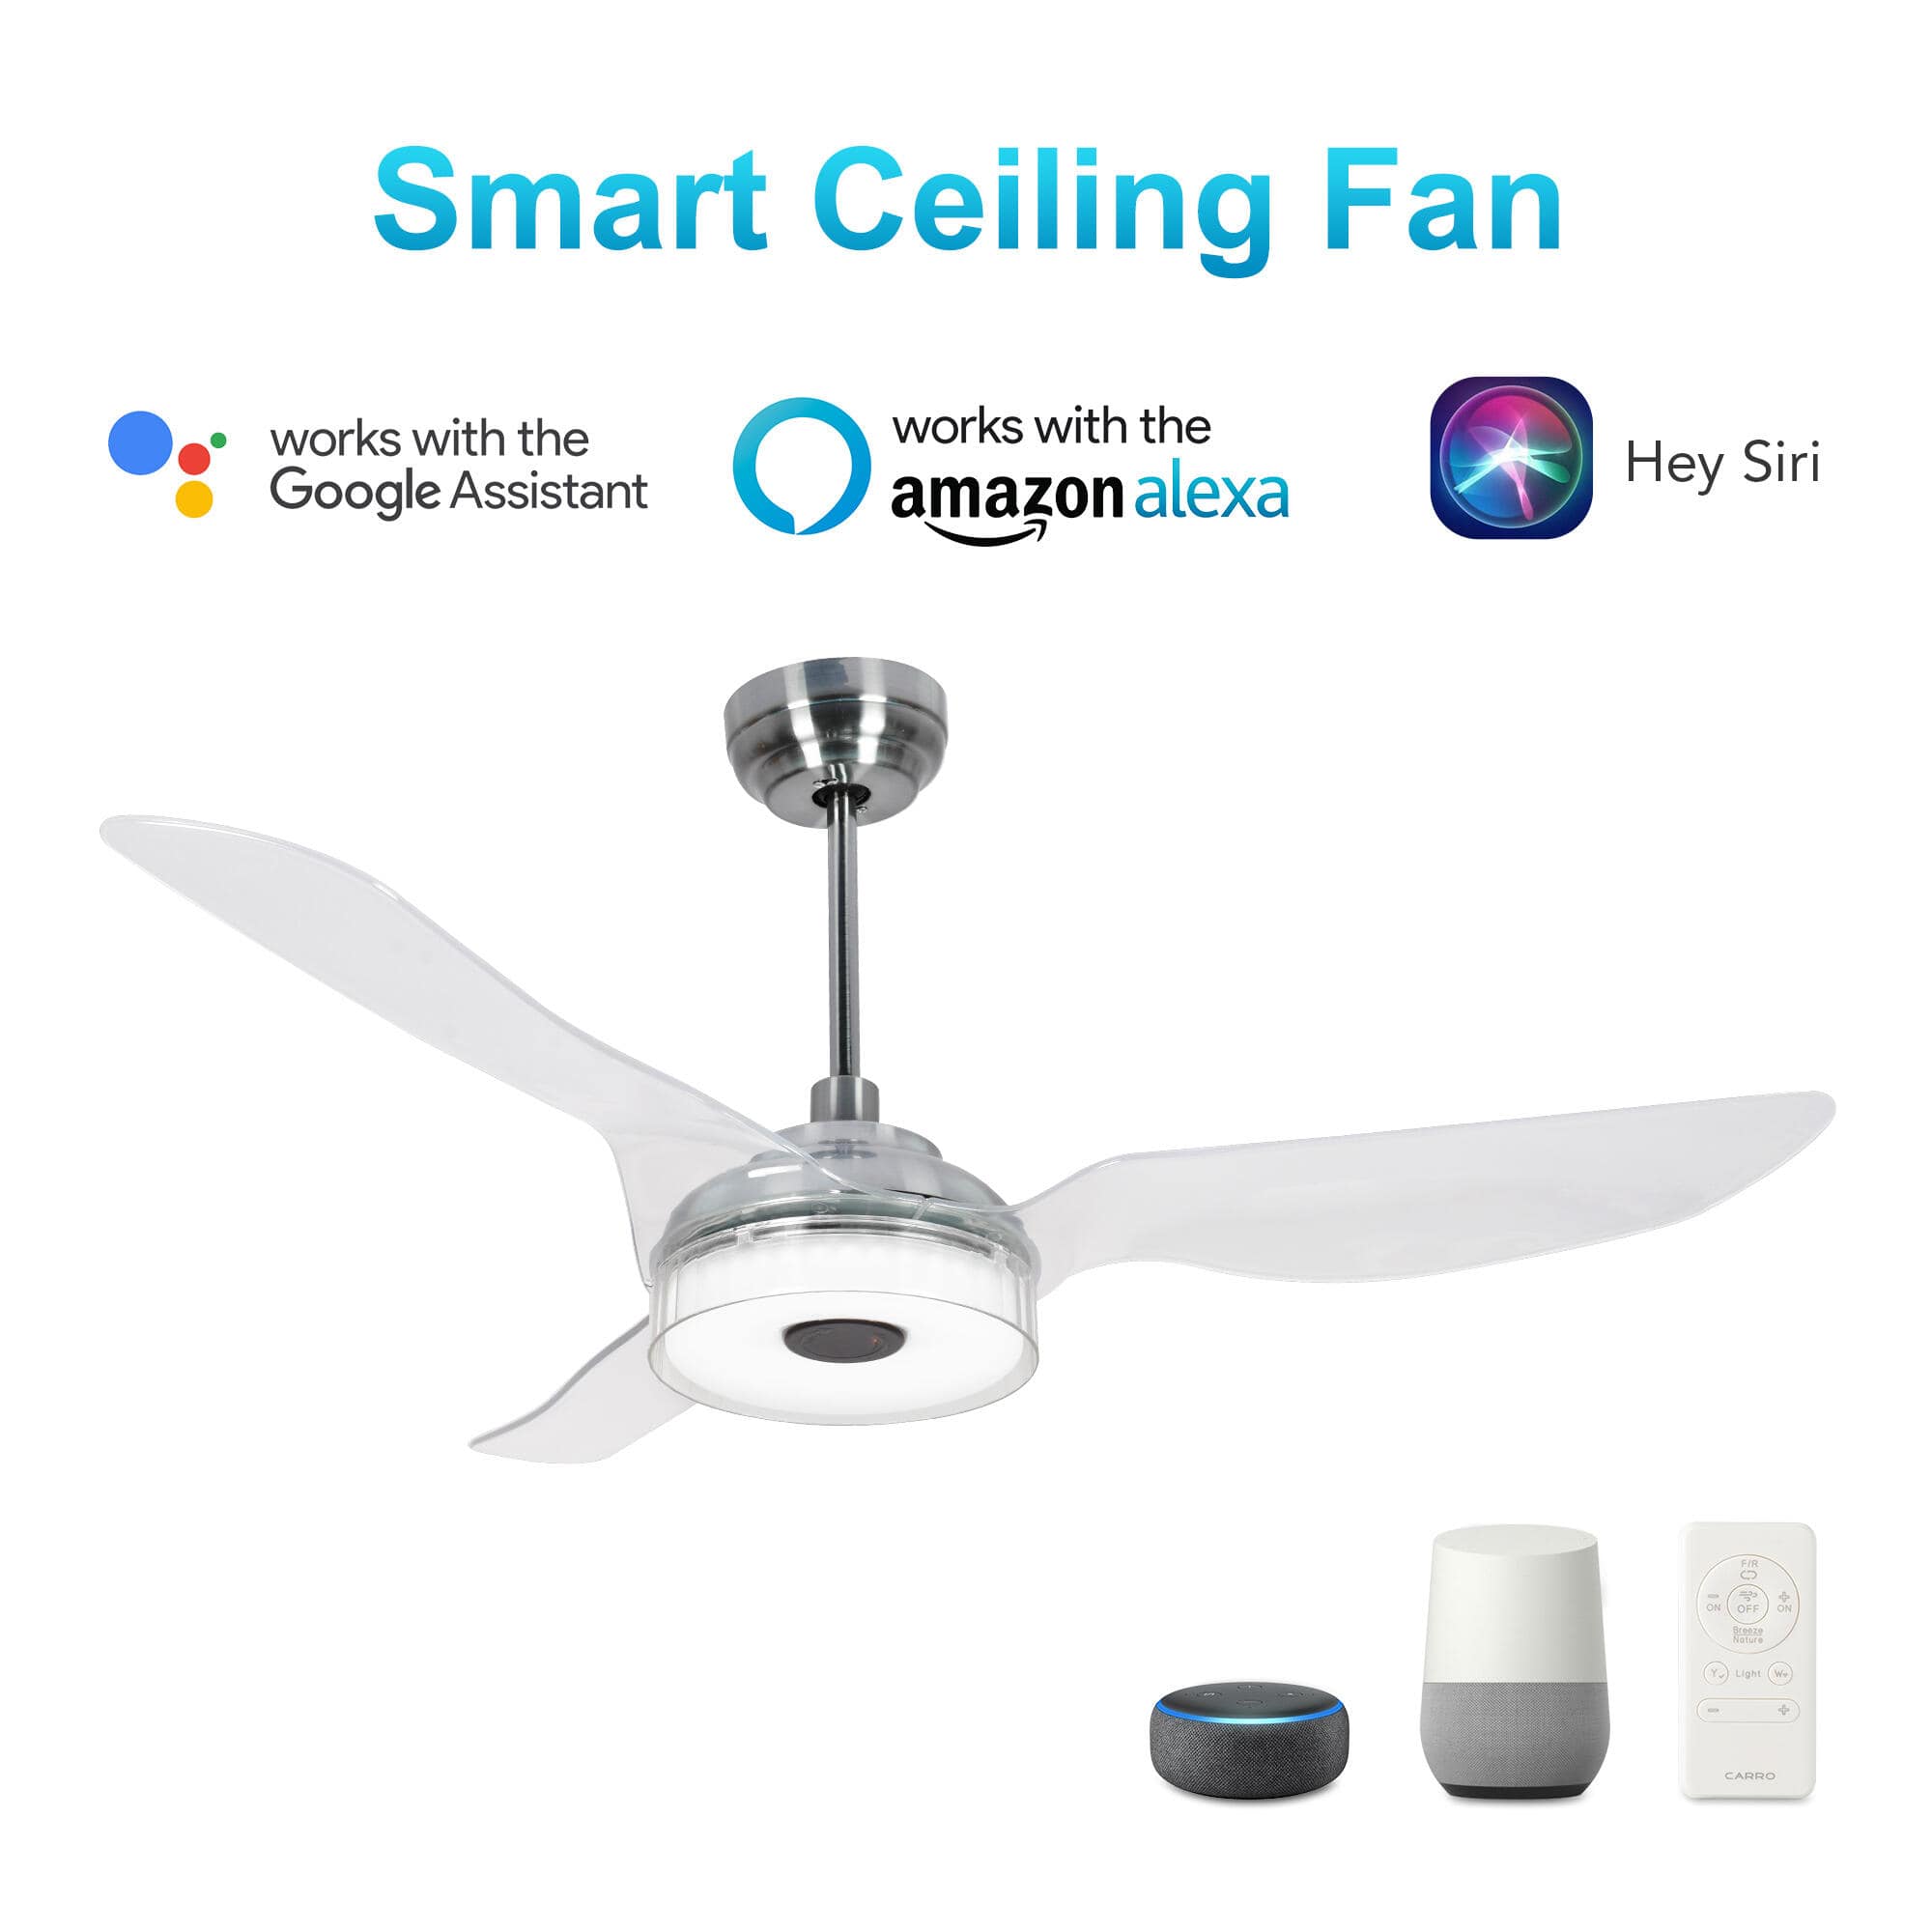 Icebreaker 52" In. Silver/Transclucent 3 Blade Smart Ceiling Fan with Dimmable LED Light Kit Works with Remote Control, Wi-Fi apps and Voice control via Google Assistant/Alexa/Siri